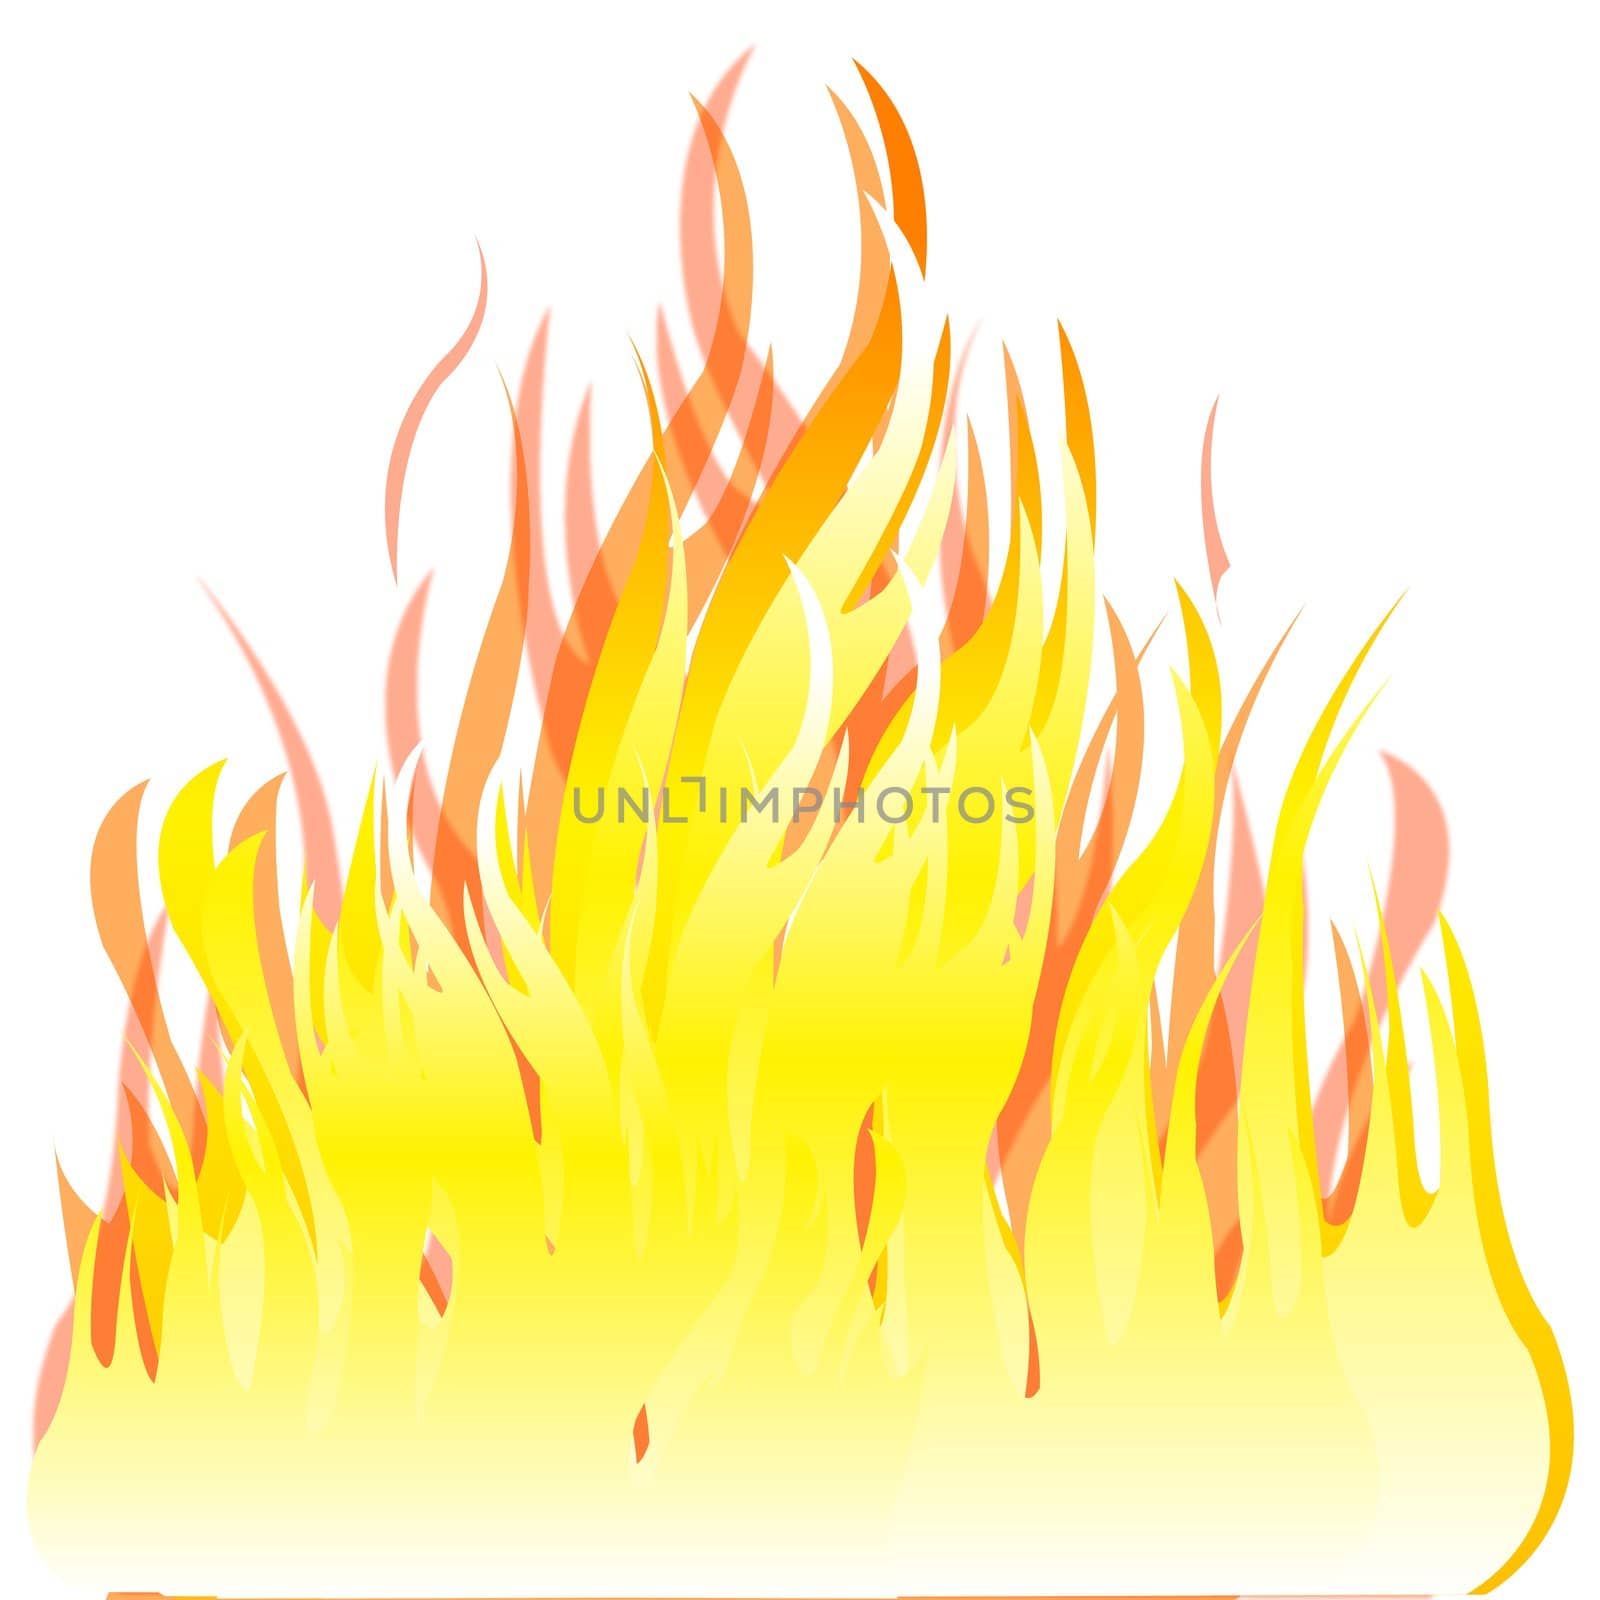 Illustration of the fire on white background